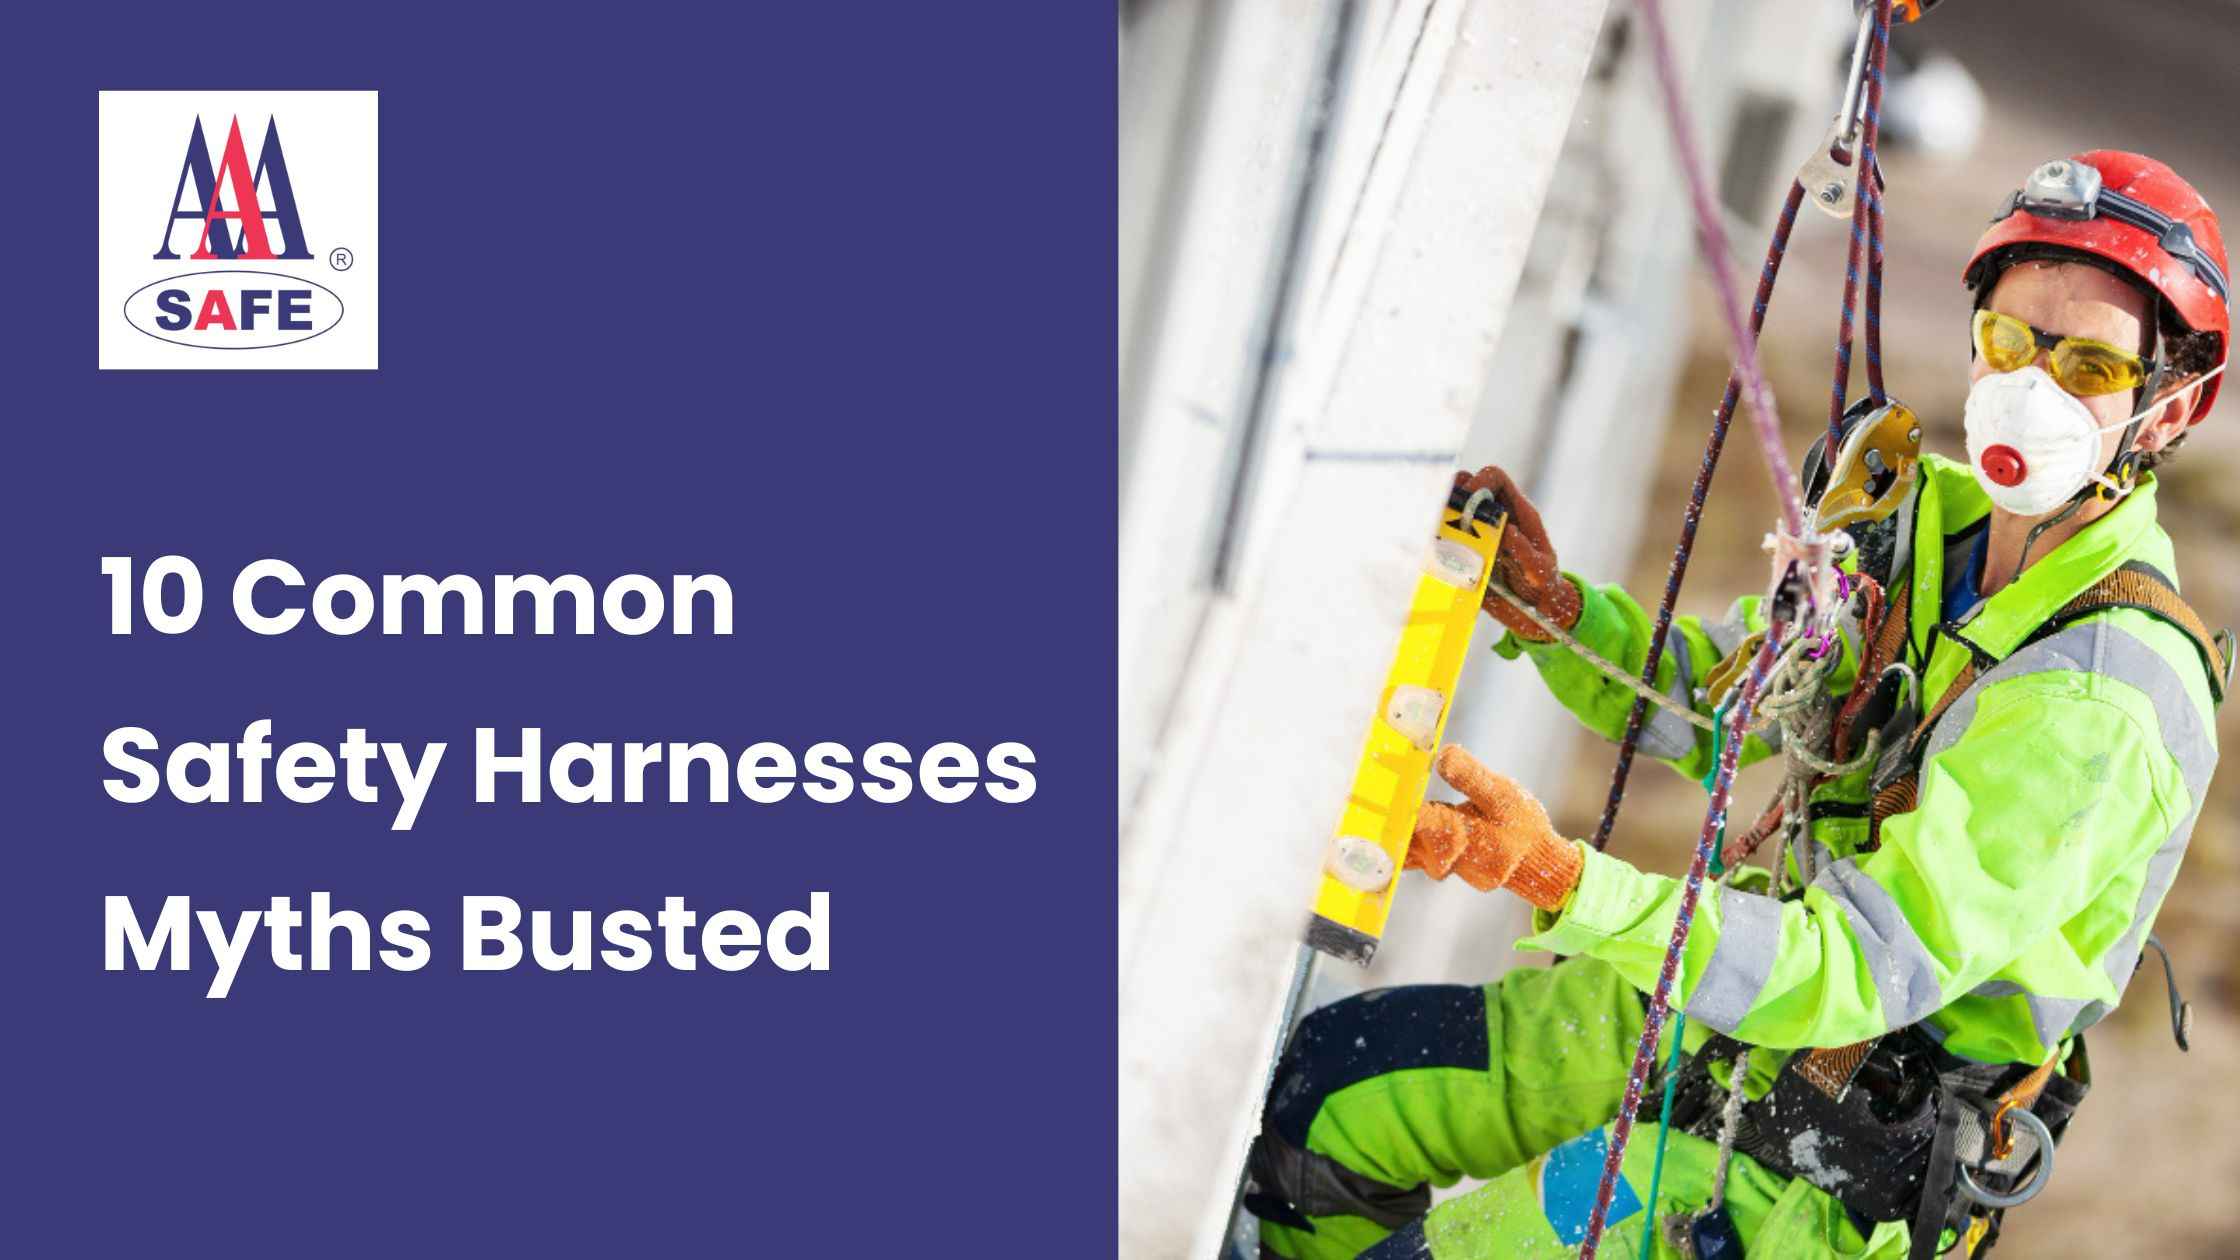 10 Common Safety Harnesses Myths Busted